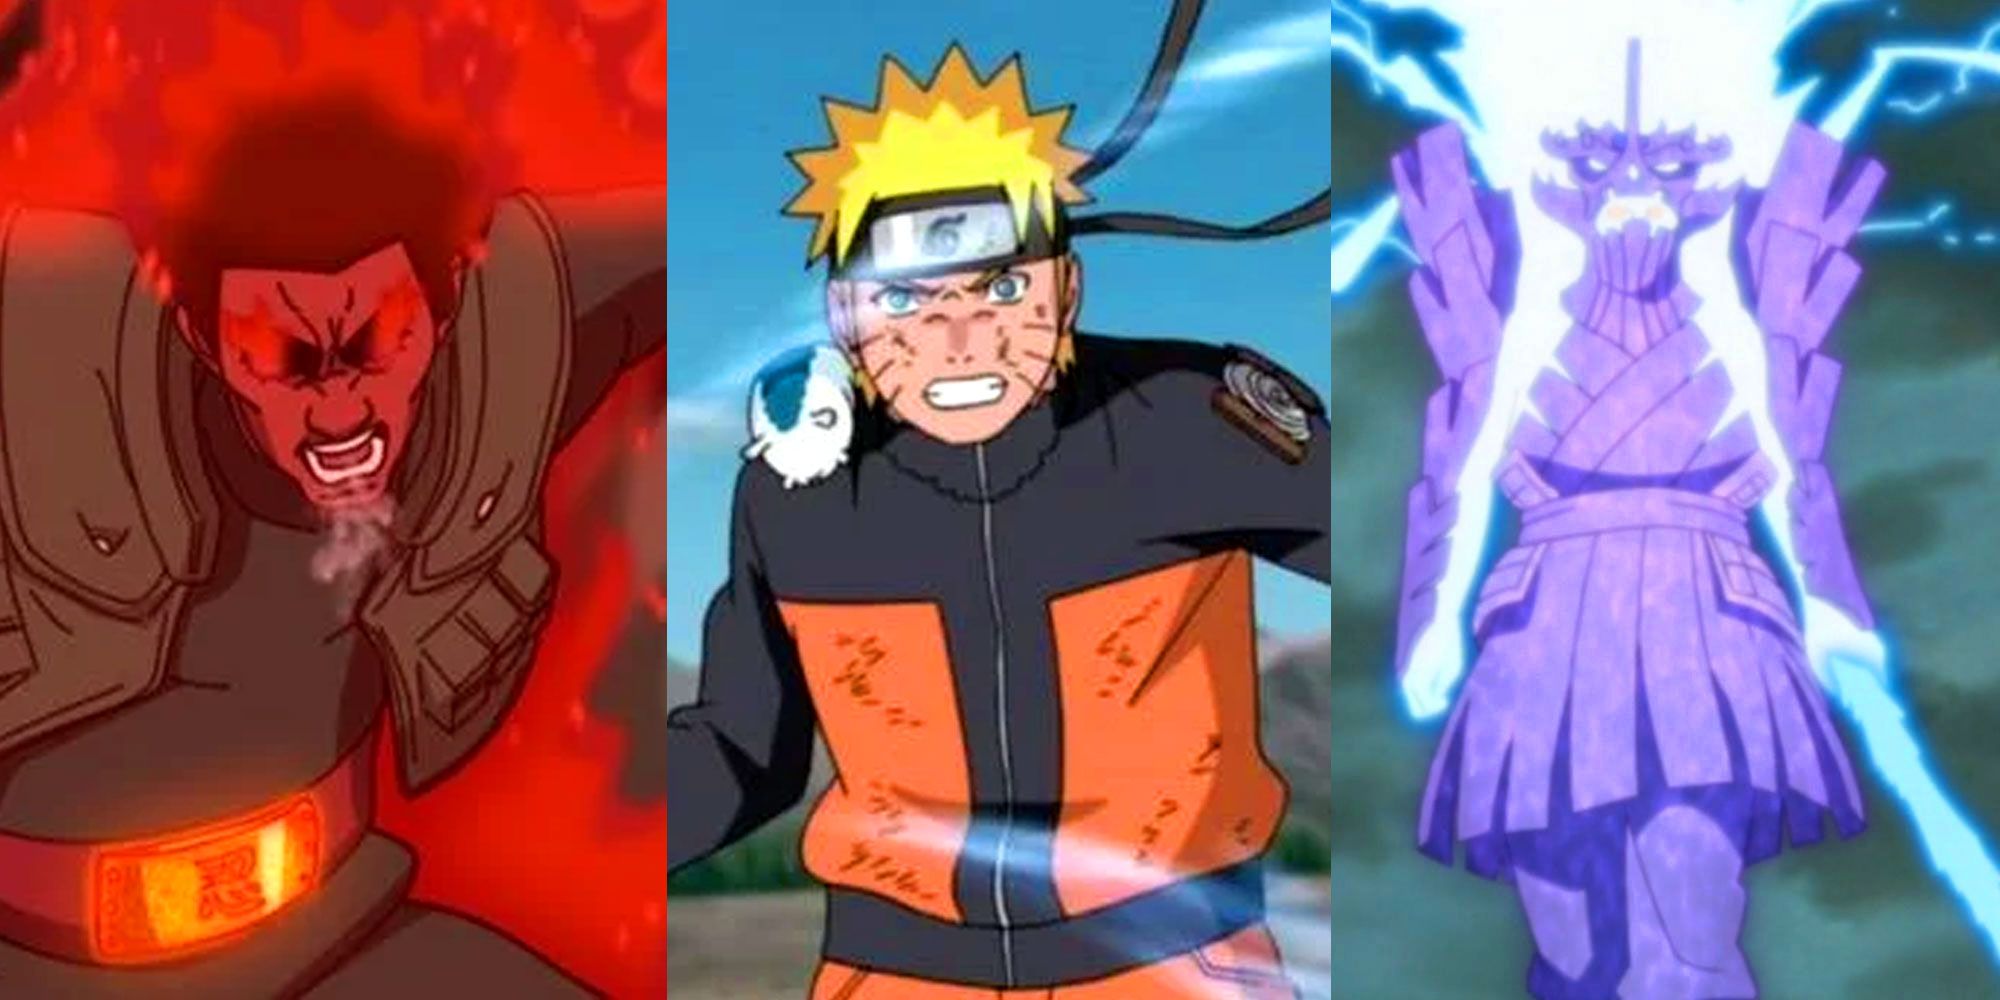 Who is the strongest in the Naruto verse, because some say its